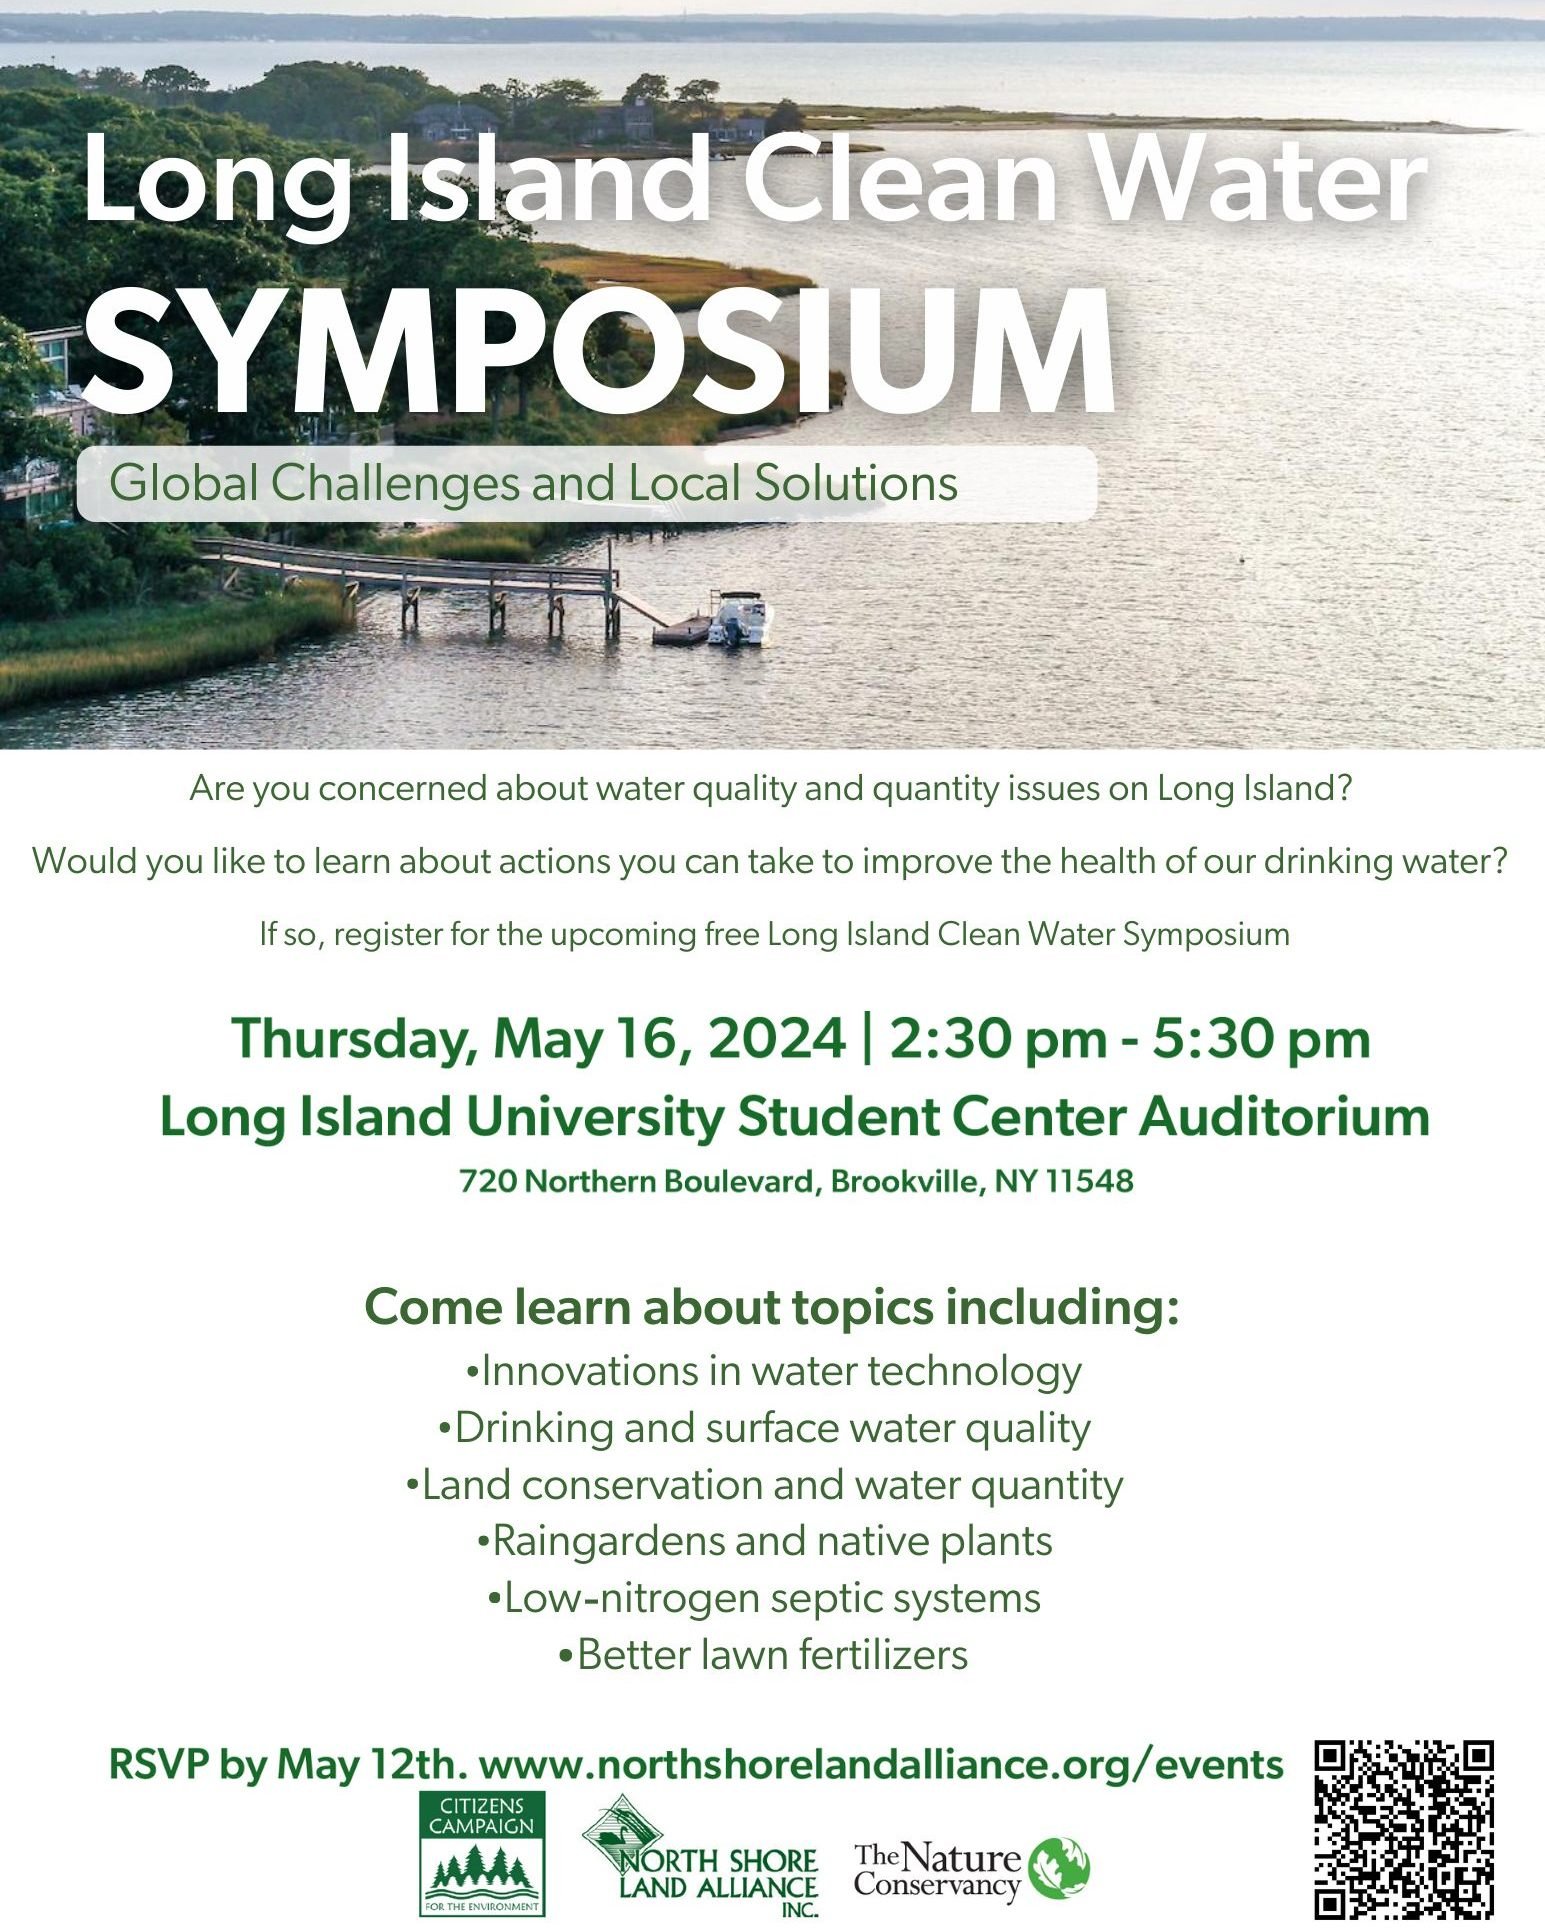 Clean Water Symposium: Global Challenges and Local Solutions.
We are joining @northshorelandalliance to co-host a conference that will bring together leaders in the field of water science. Leading experts will update attendees about the condition of 